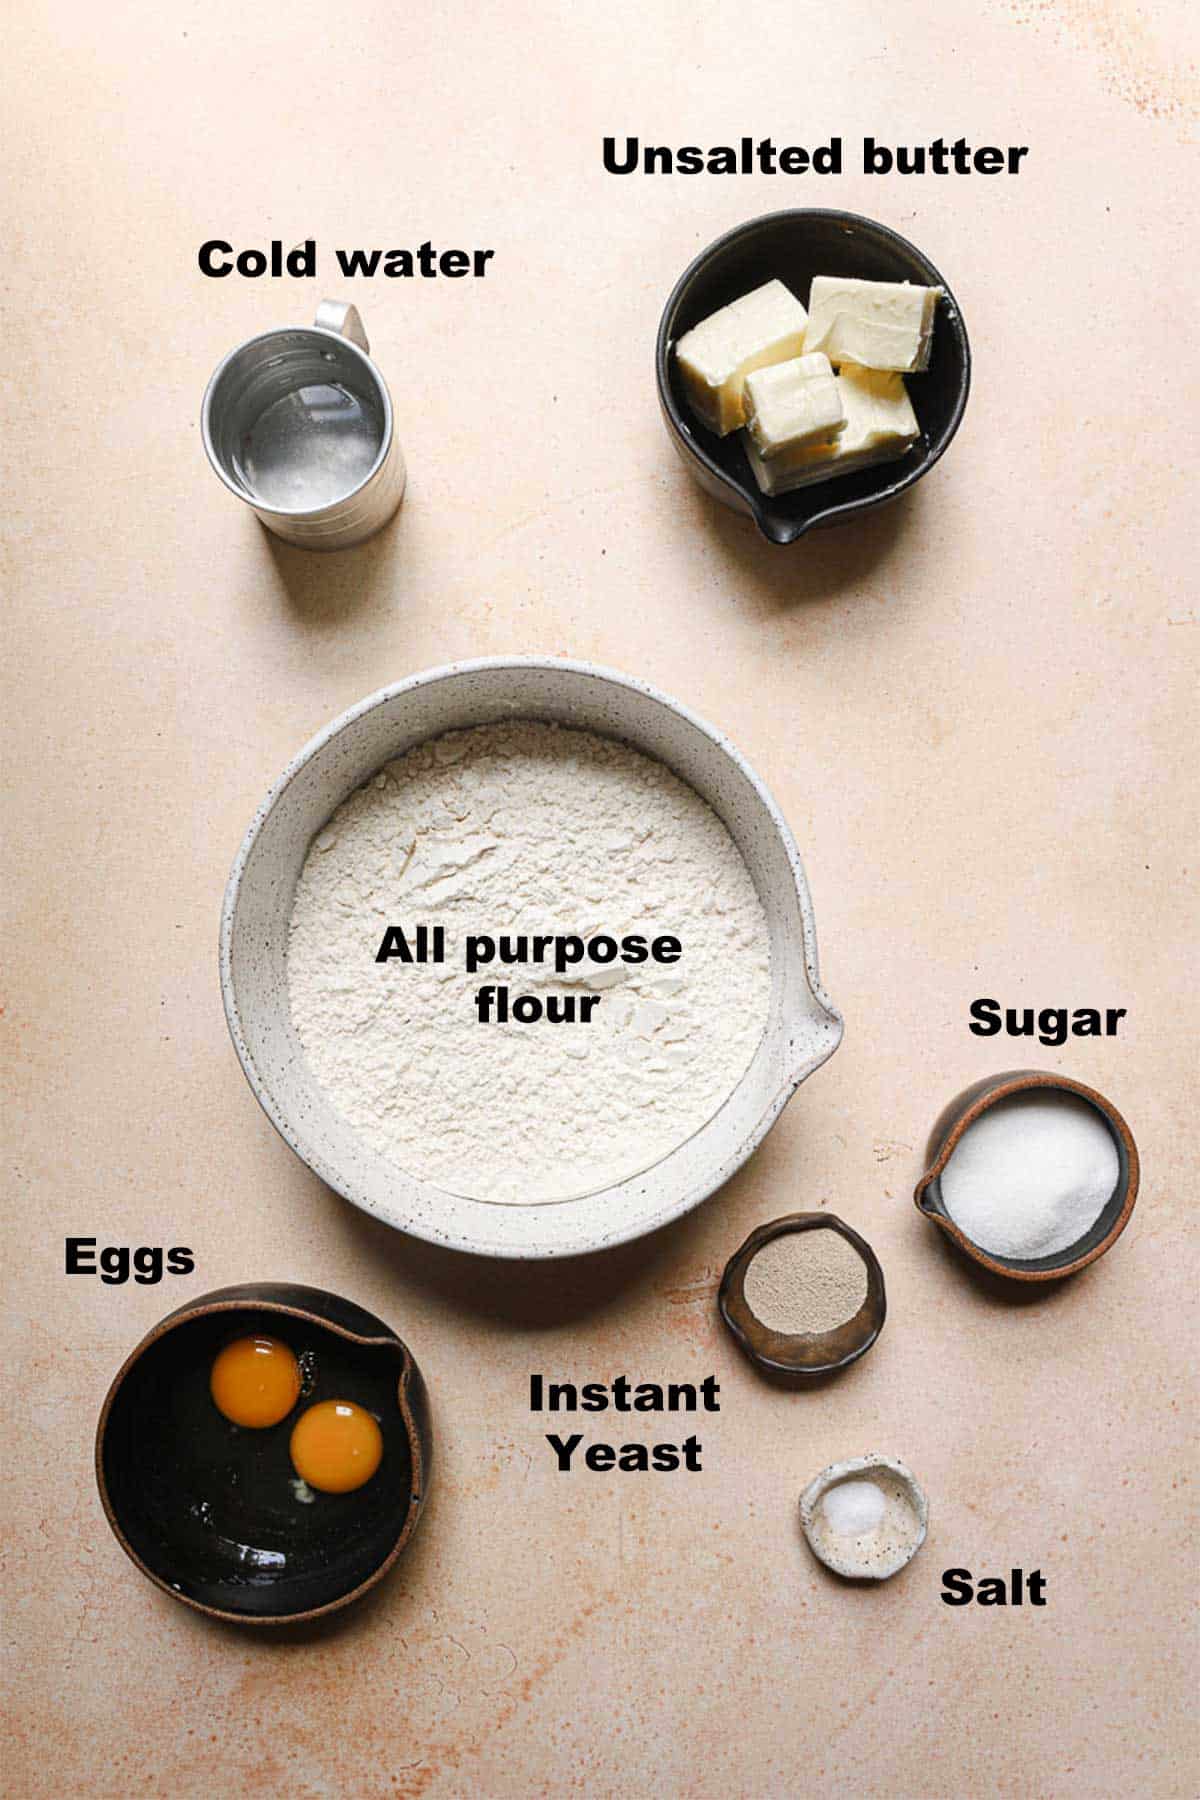 Ingredients to make yeast fried donuts